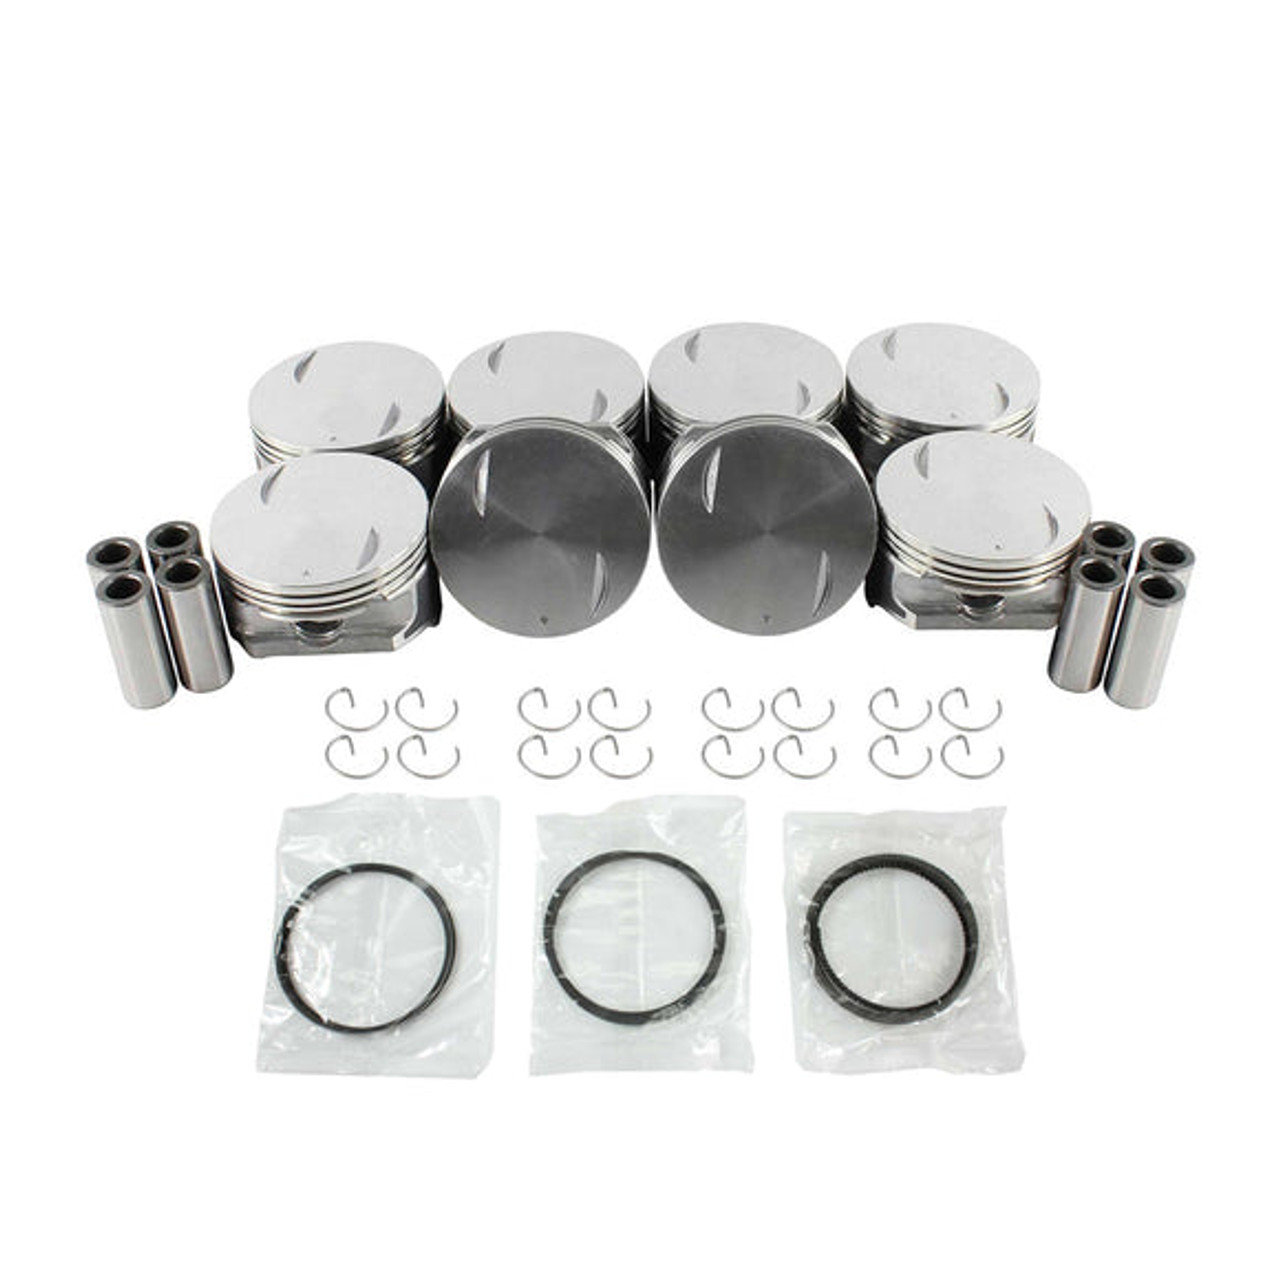 Piston Set with Rings - 2002 GMC C3500HD 8.1L Engine Parts # PRK3181ZE61